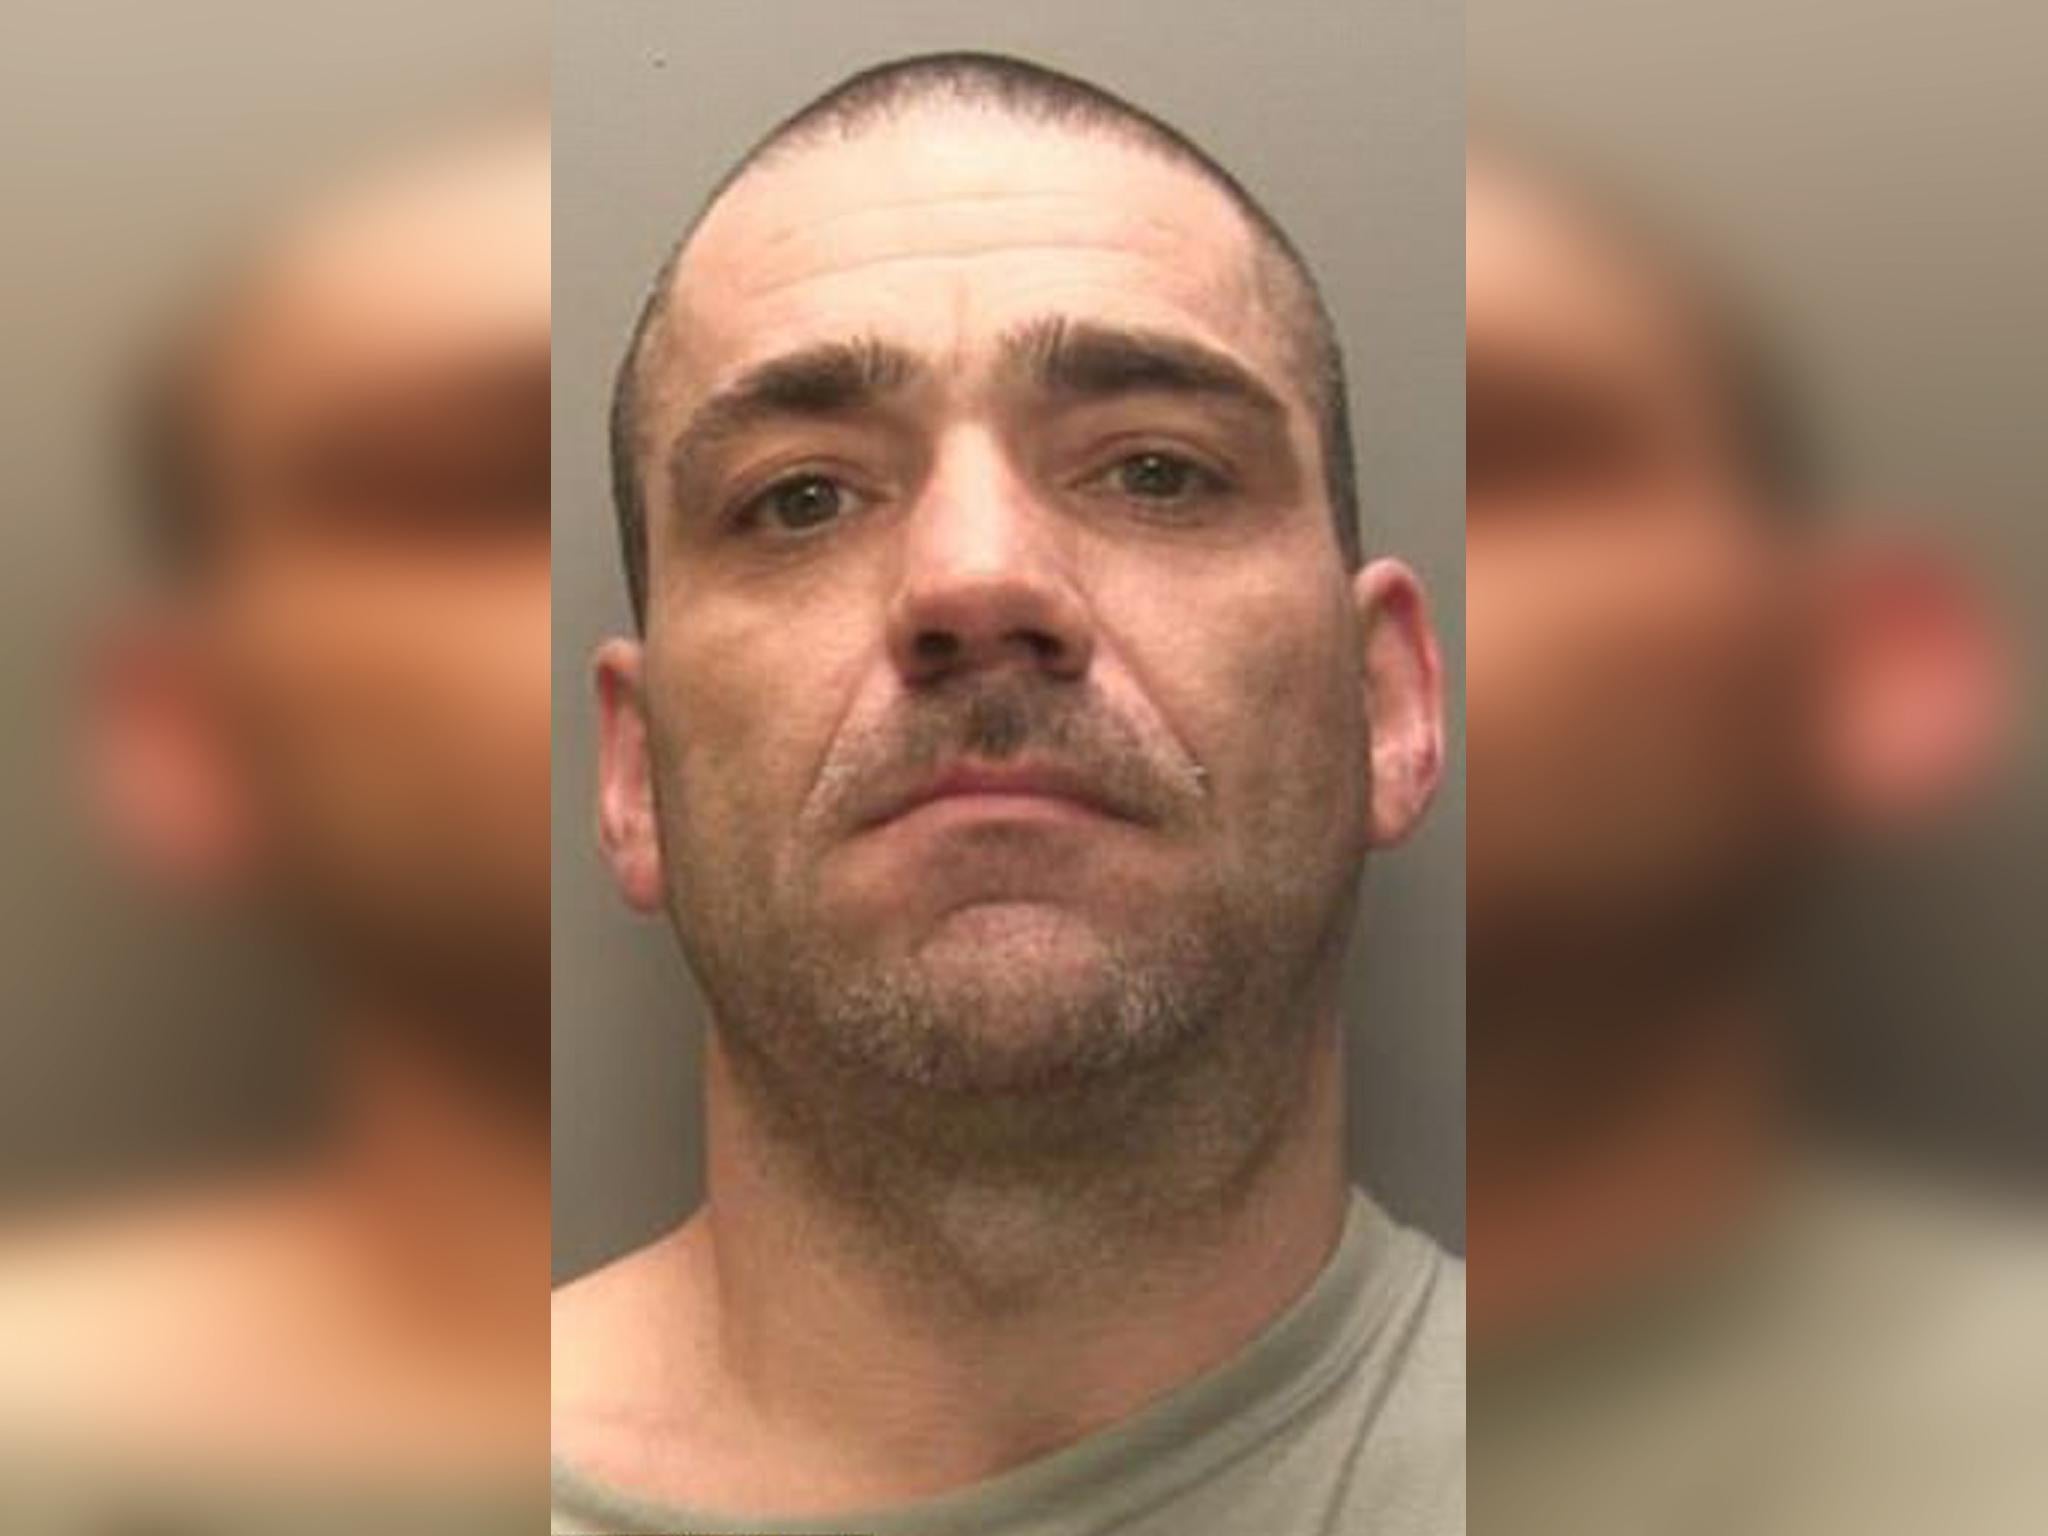 Richard Wallis, 43, has been jailed for life with a minimum term of 16 years